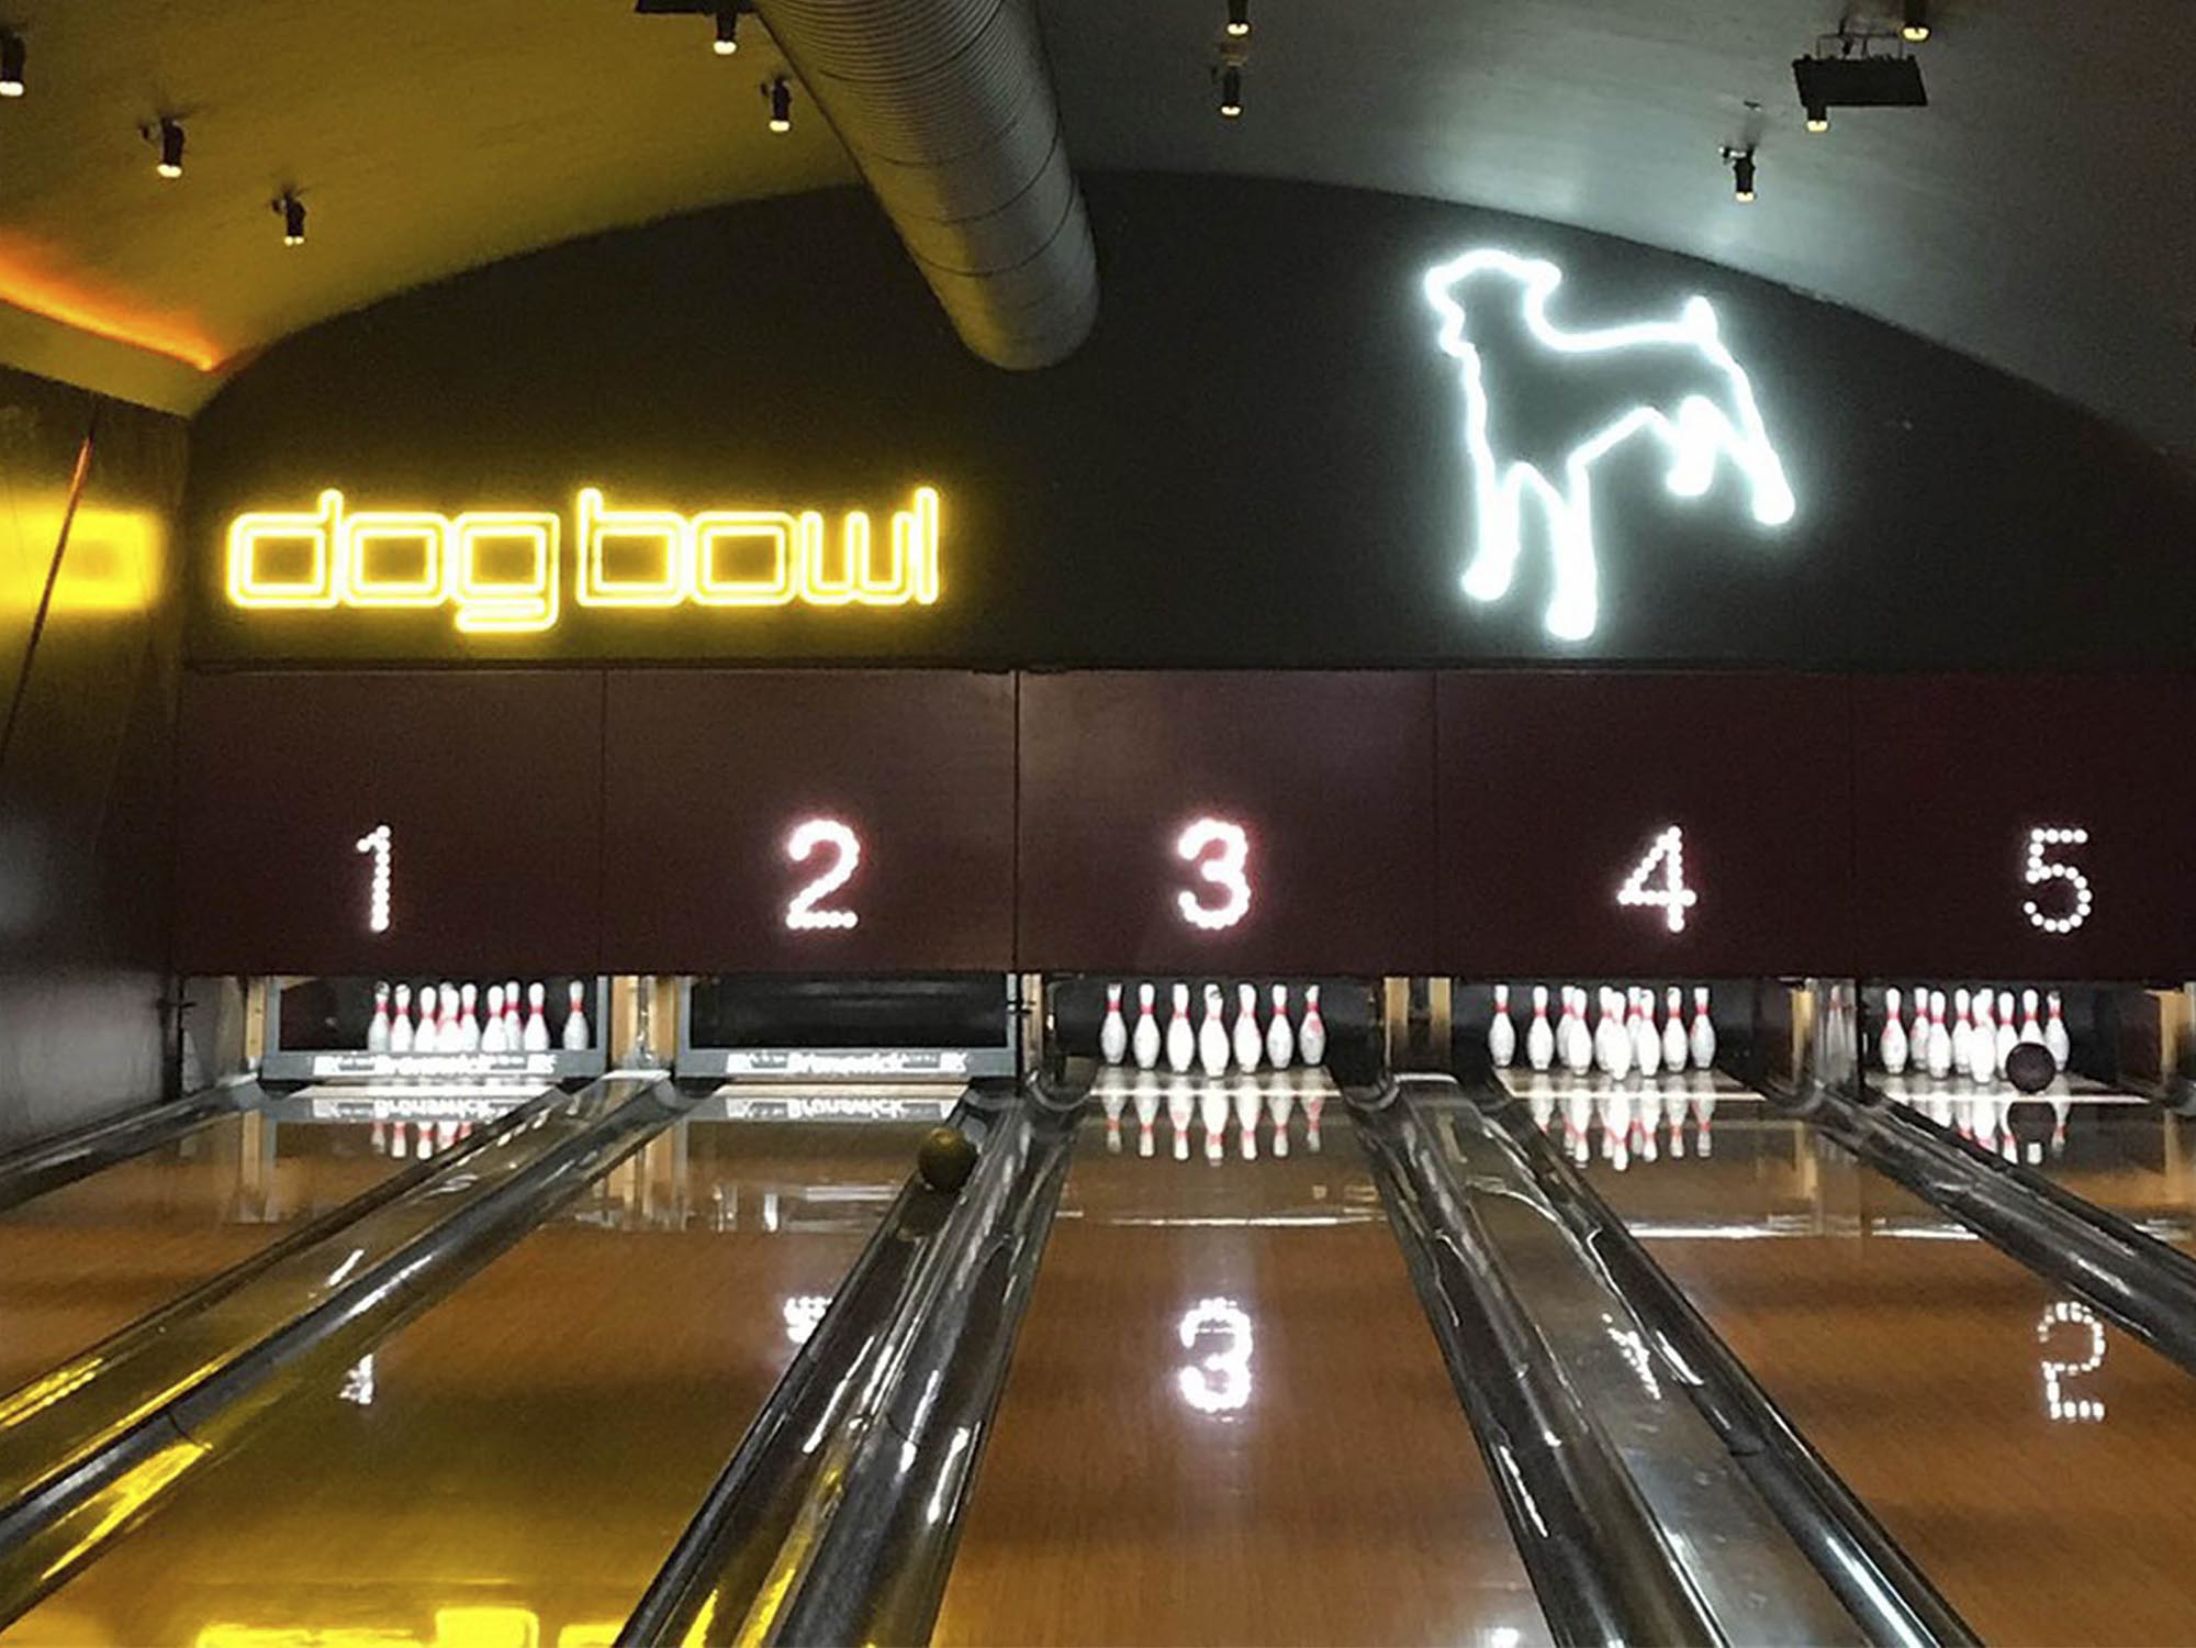 Dog Bowl - Best Bars in Manchester